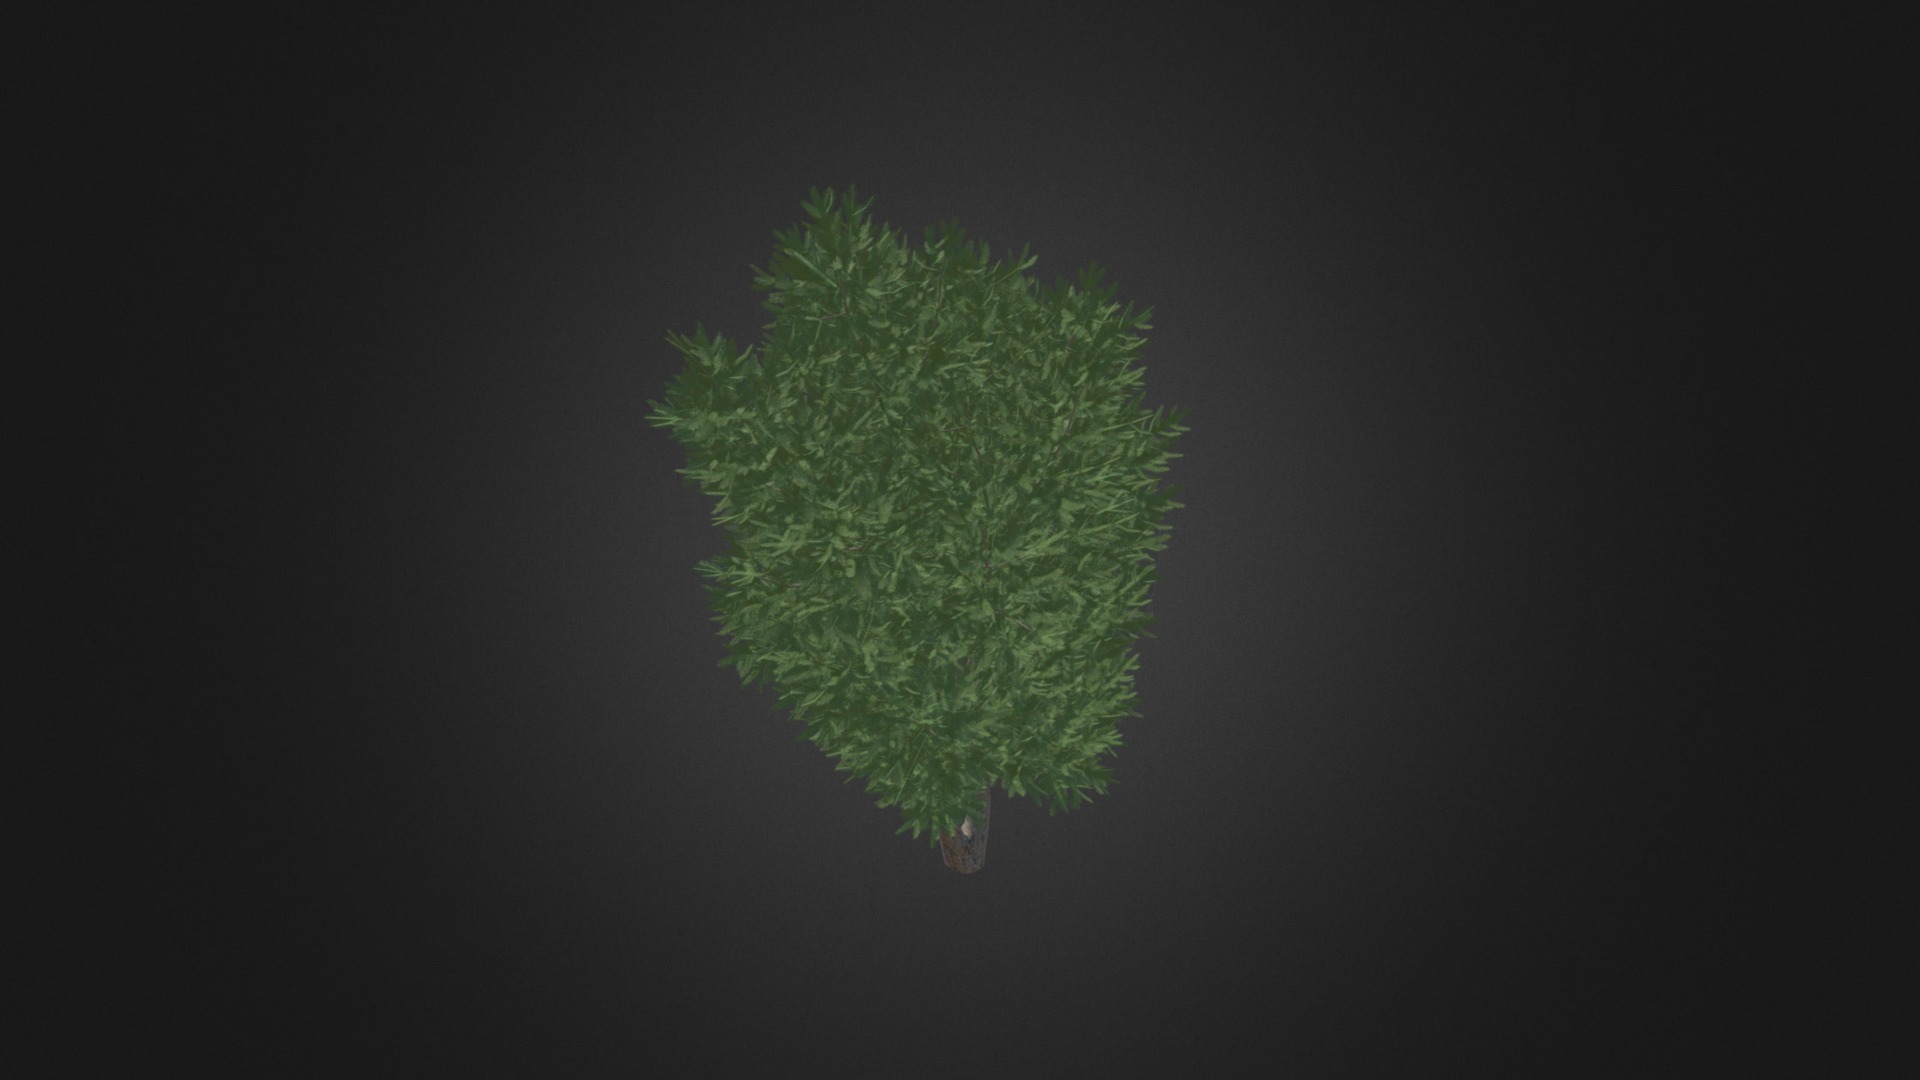 3D model European Yew (Taxus baccata) 3.7m - This is a 3D model of the European Yew (Taxus baccata) 3.7m. The 3D model is about a green leaf on a black background.